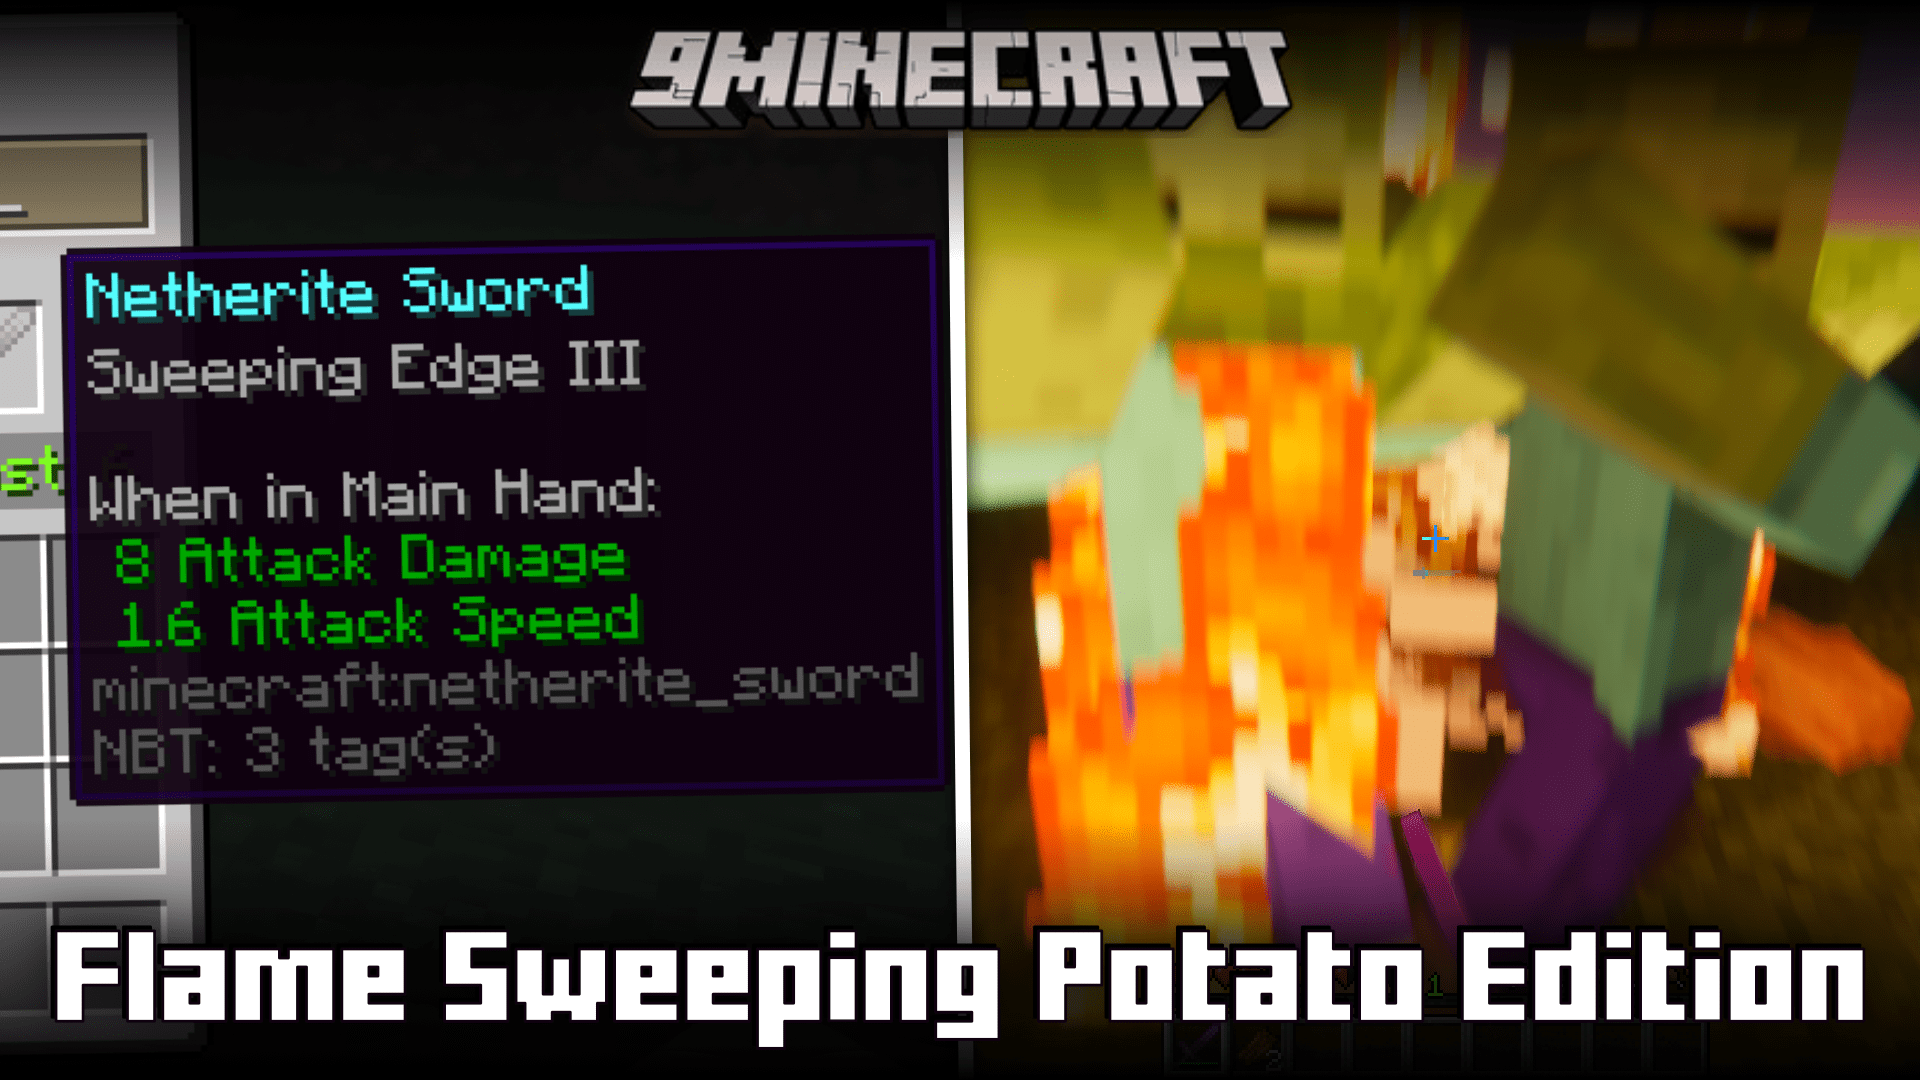 Flame Sweeping Potato Edition Mod (1.20.1, 1.19.4) - Combined Sword Attack! 1